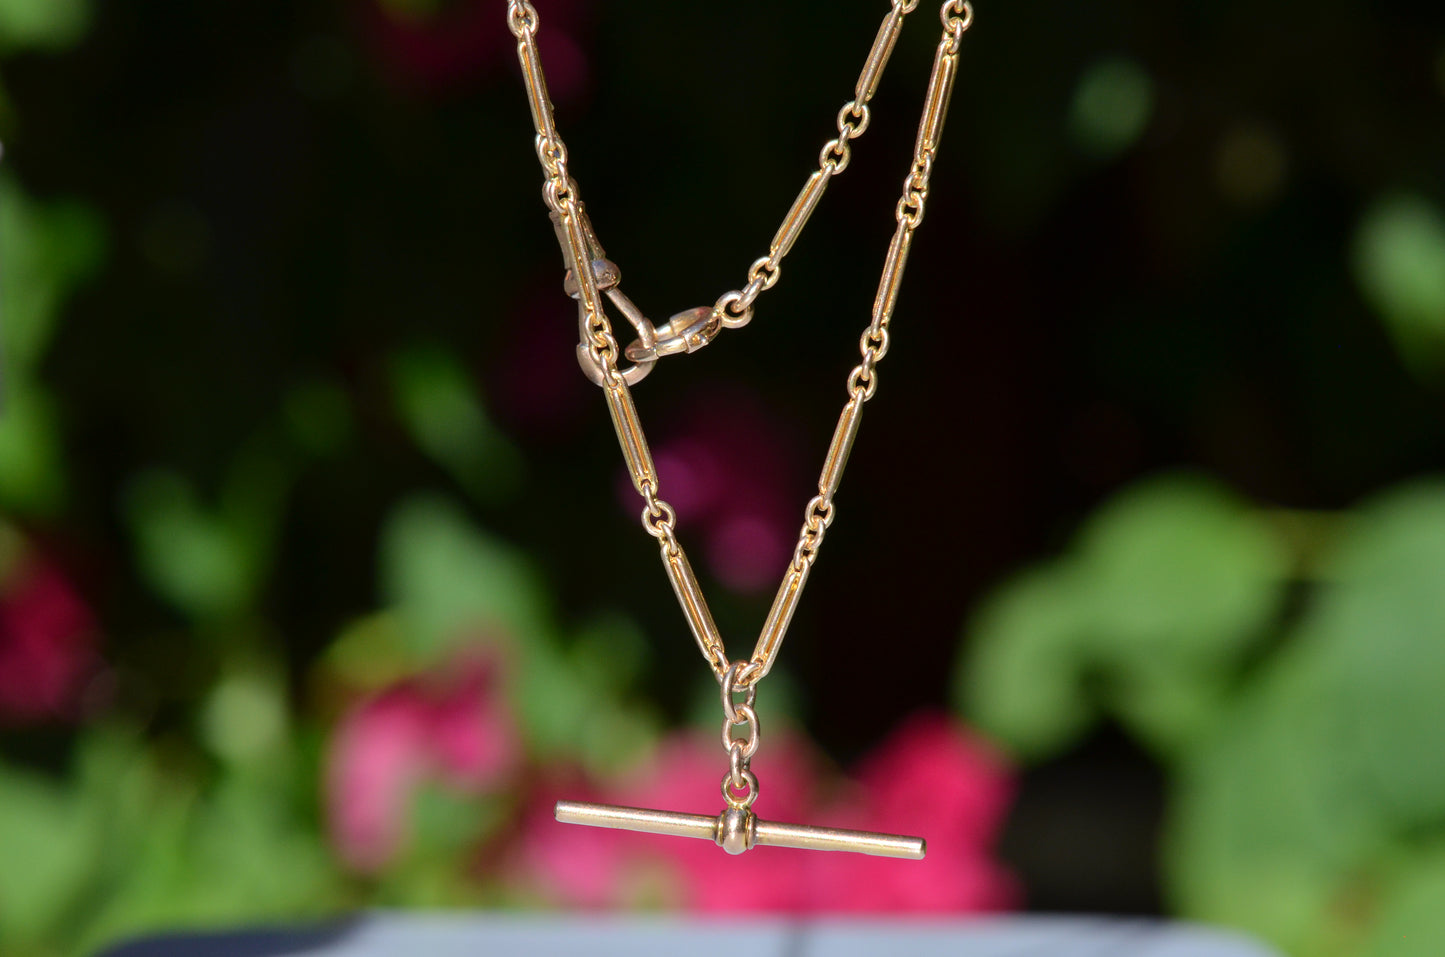 The elongated bar link Albert chain is suspended in front of a blurry dark green background dotted with pink florals. The t-bar of the necklace hangs in the centre, with the dog clip and bolt ring clasps visible.